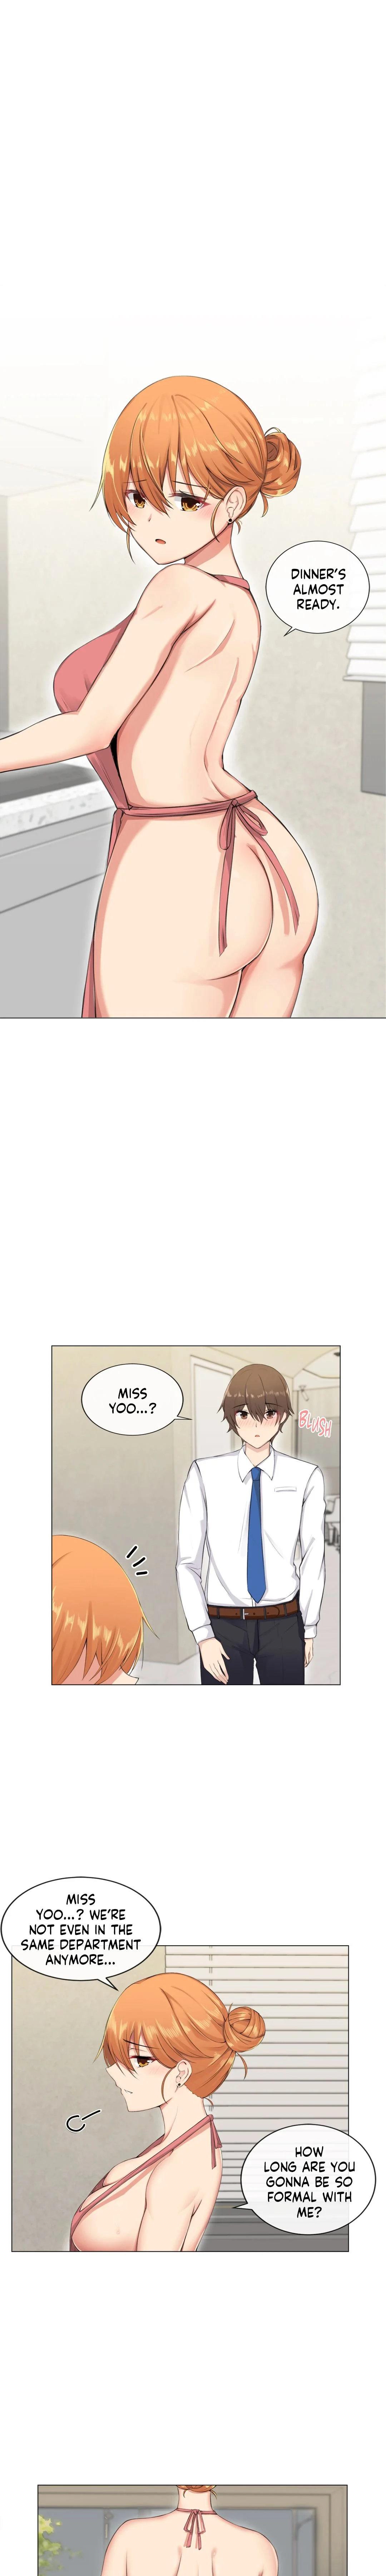 [Dumangoon, 130F] Sexcape Room: Pile Up Ch.9/9 [English] [Manhwa PDF] Completed 111